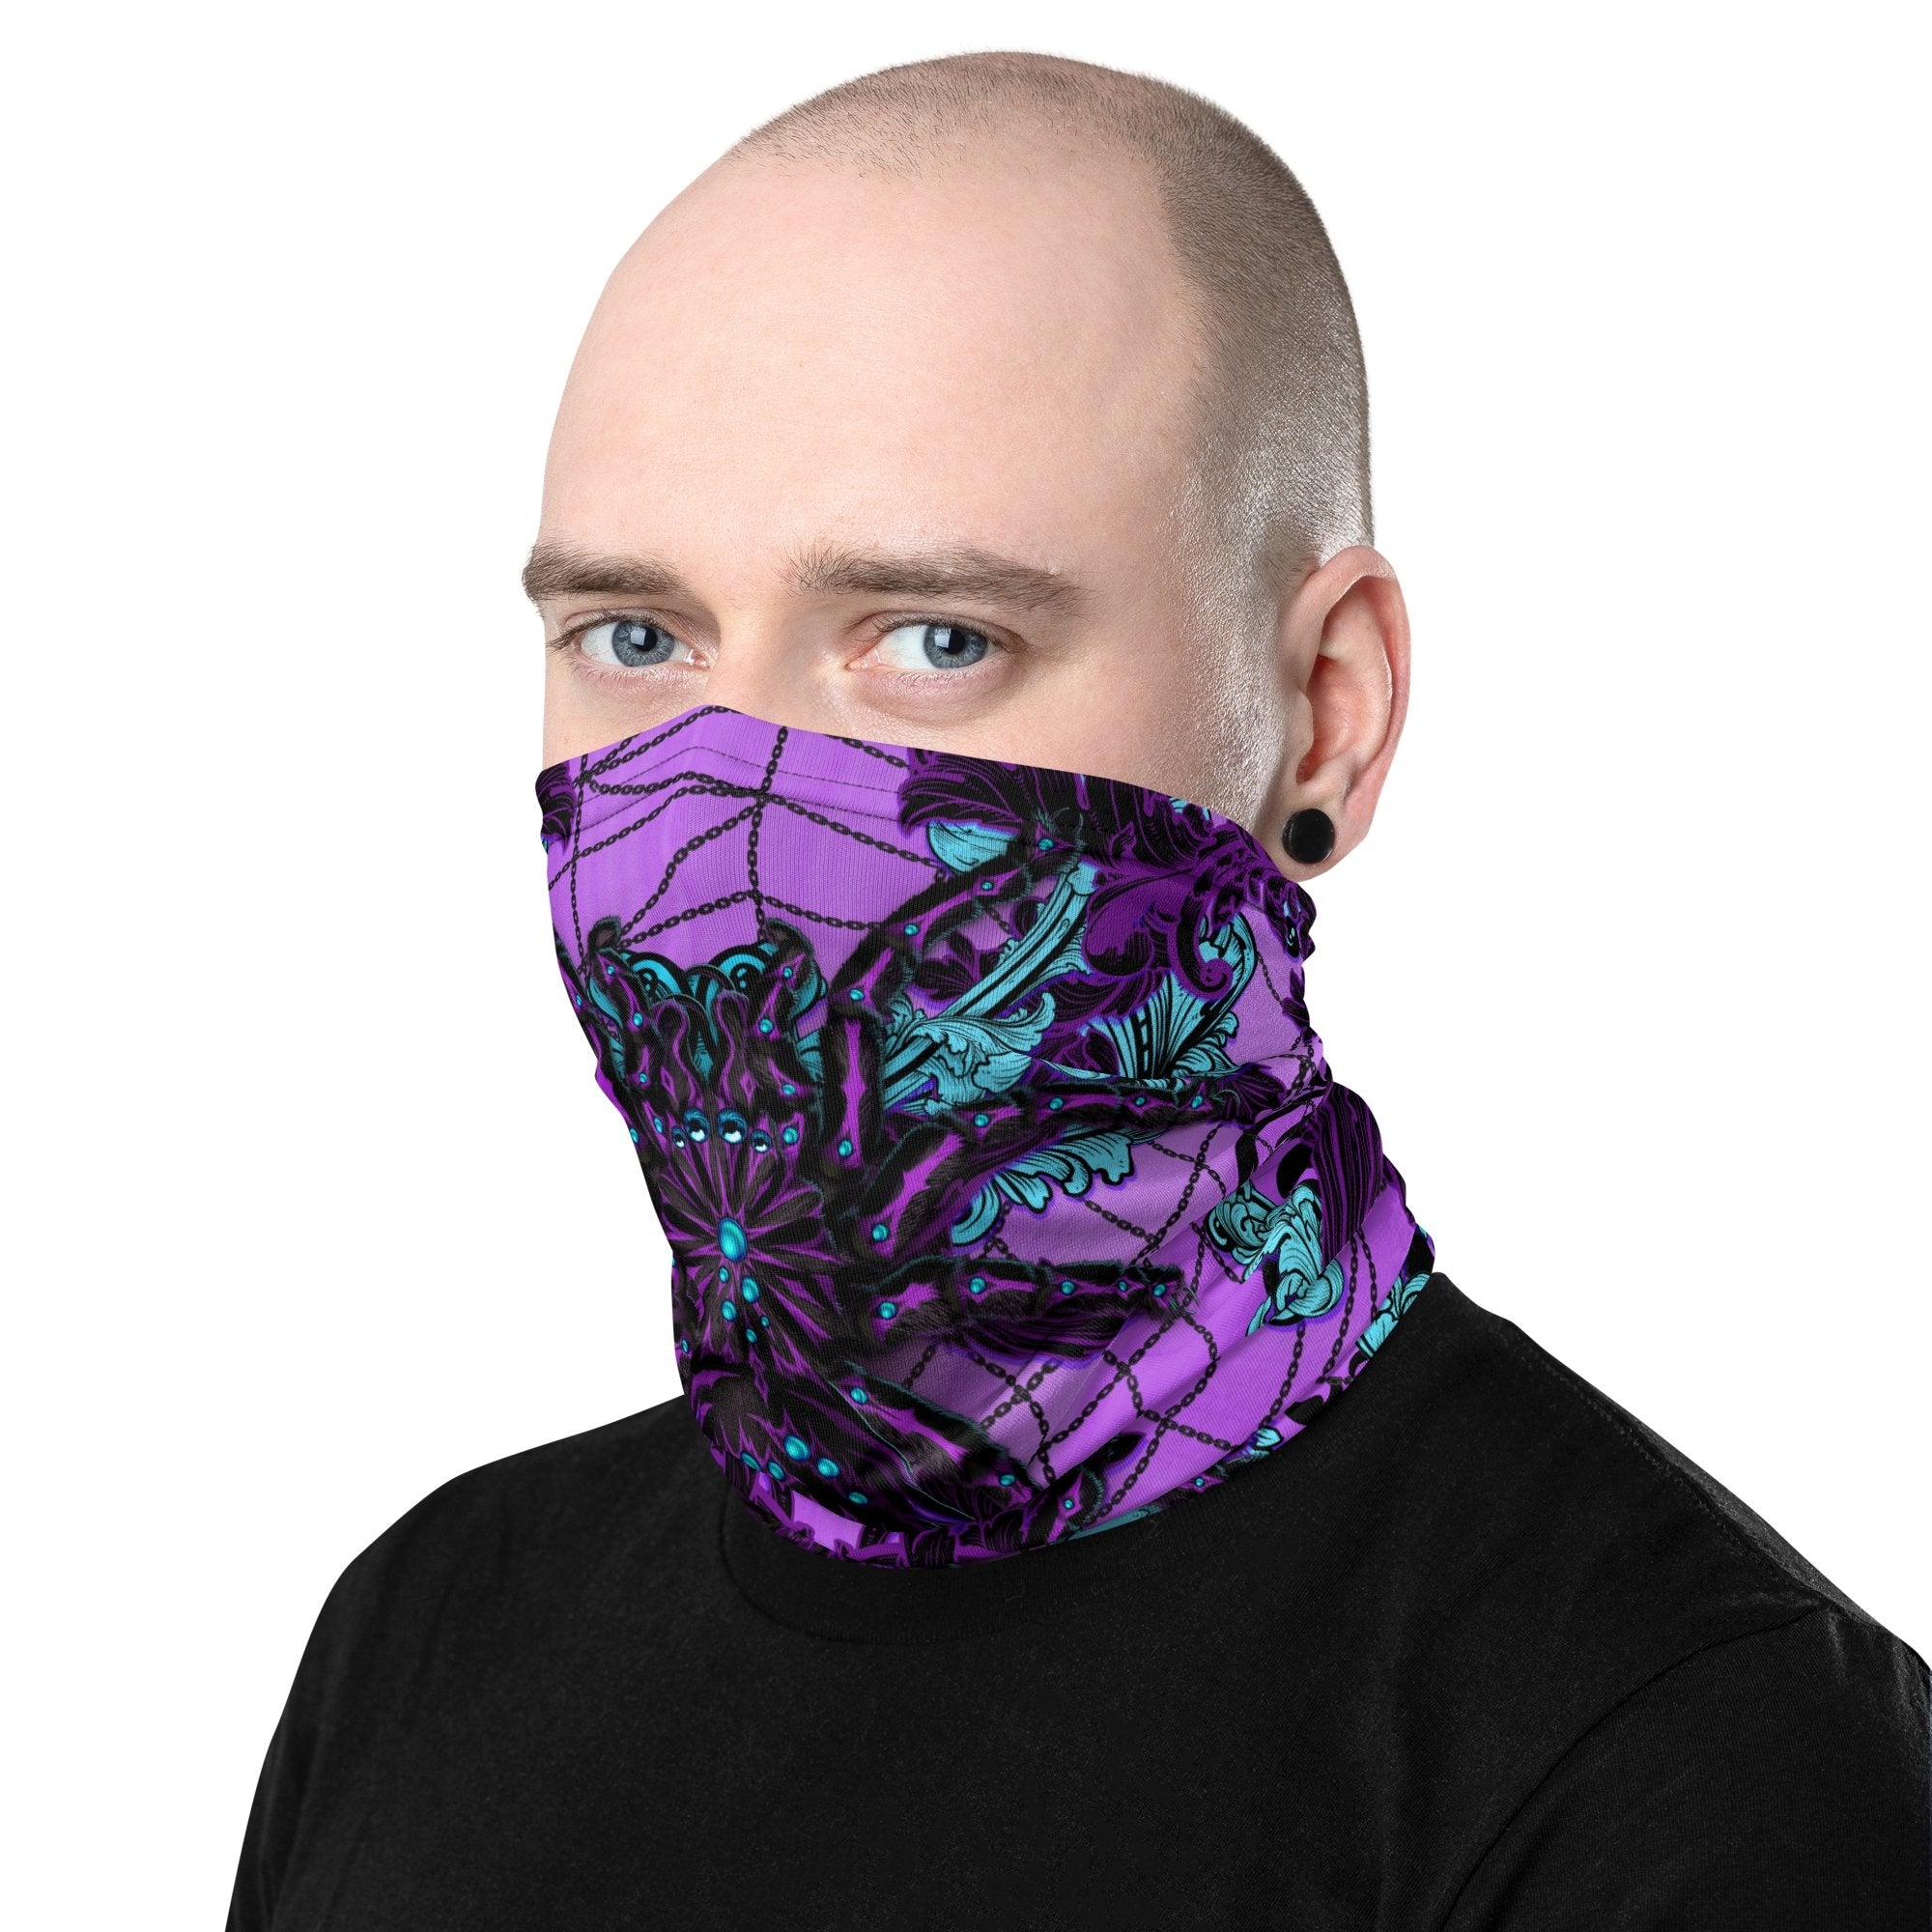 Pastel Goth Neck Gaiter, Face Mask, Head Covering, Gothic Outfit, Tarantula Lover Gift - Spider, Black and Purple - Abysm Internal